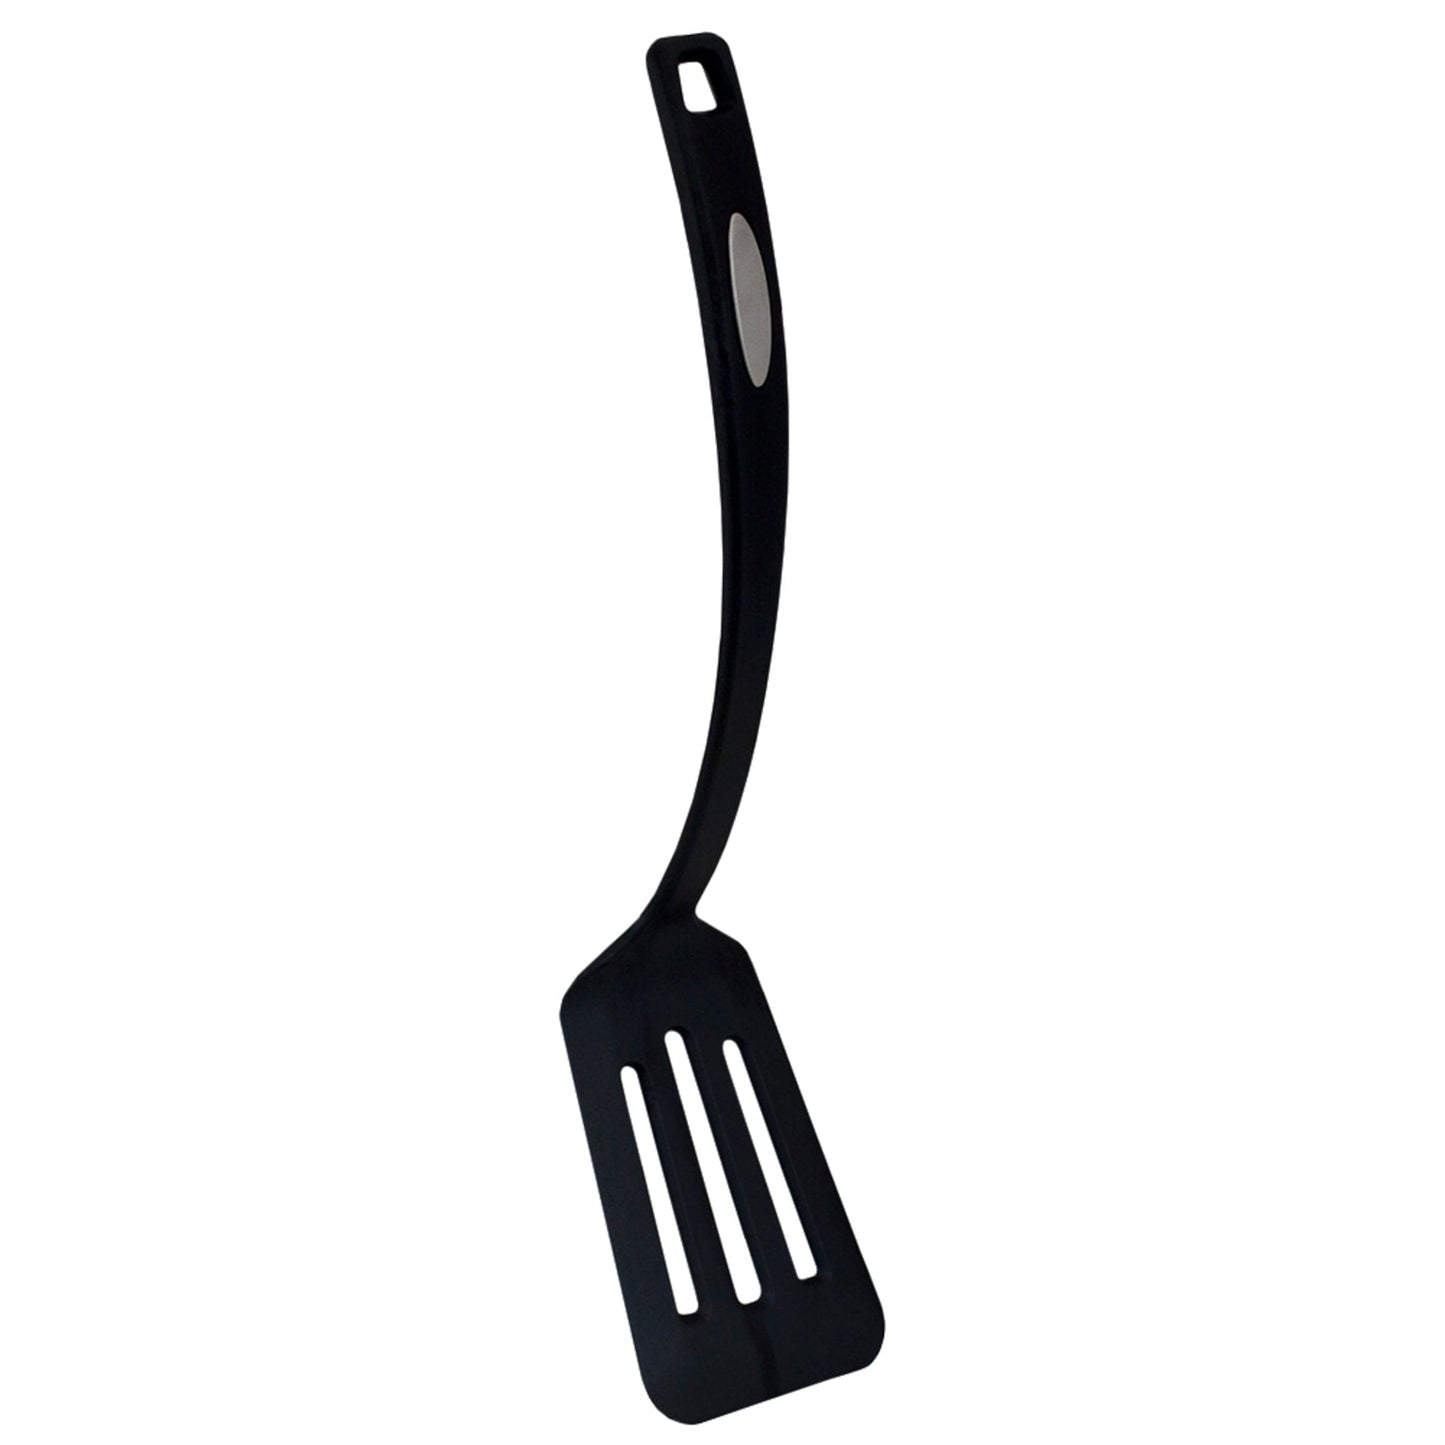 Flexible Nylon Non-Stick Slotted Spatula with Curved Handle, Black